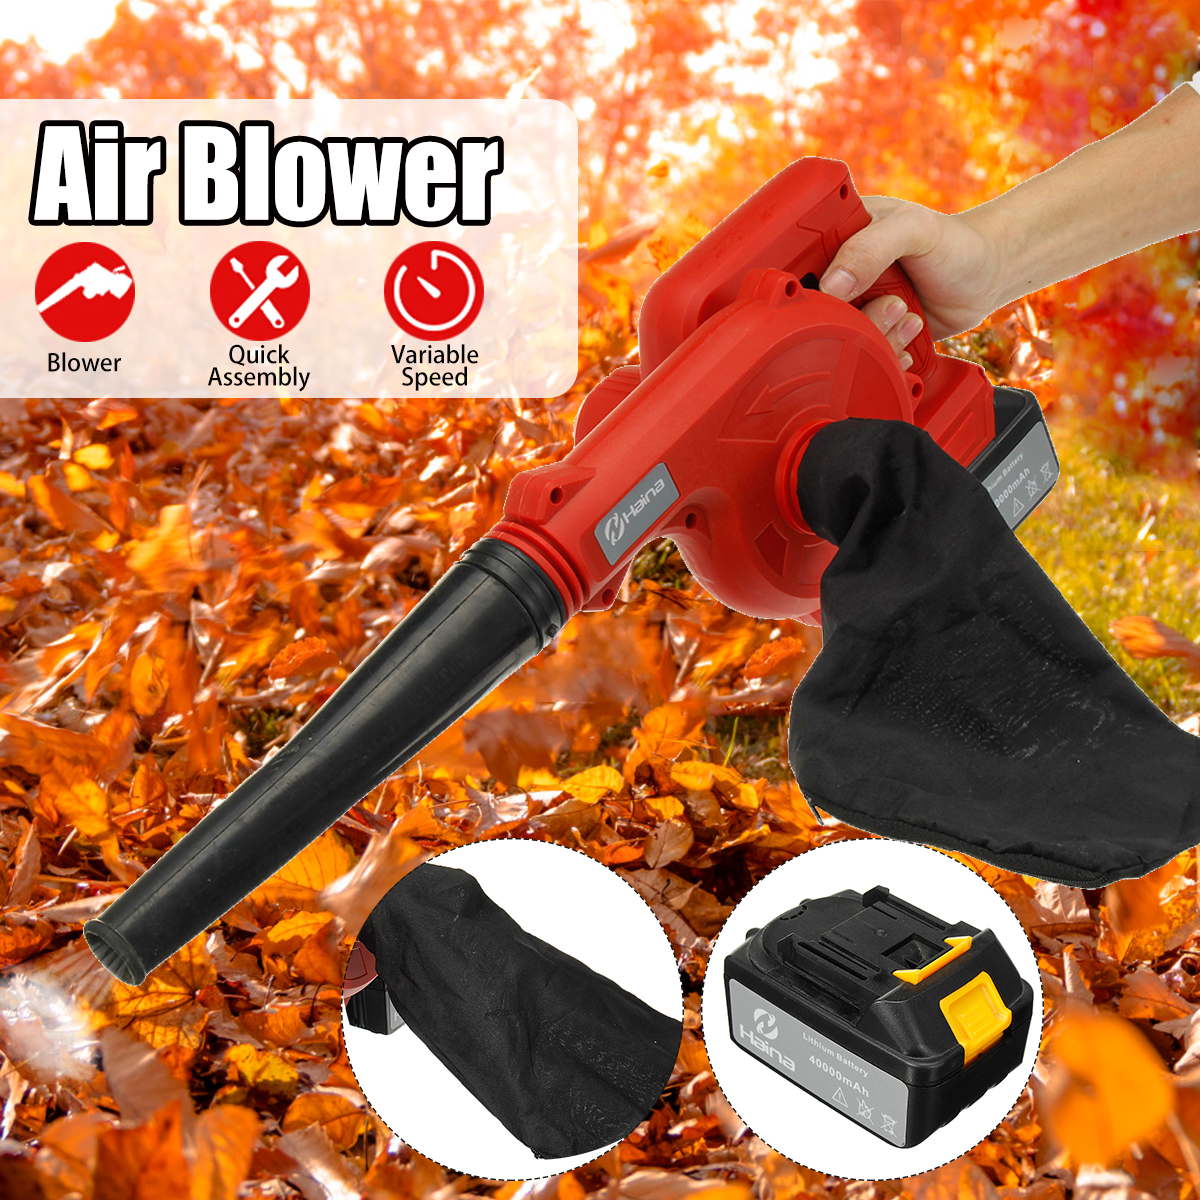 Leaf-Blower-Outdoor-Grass-Blower-Garden-Handheld-Electric-Battery-Tool-Waste-Collection-Bag-1653882